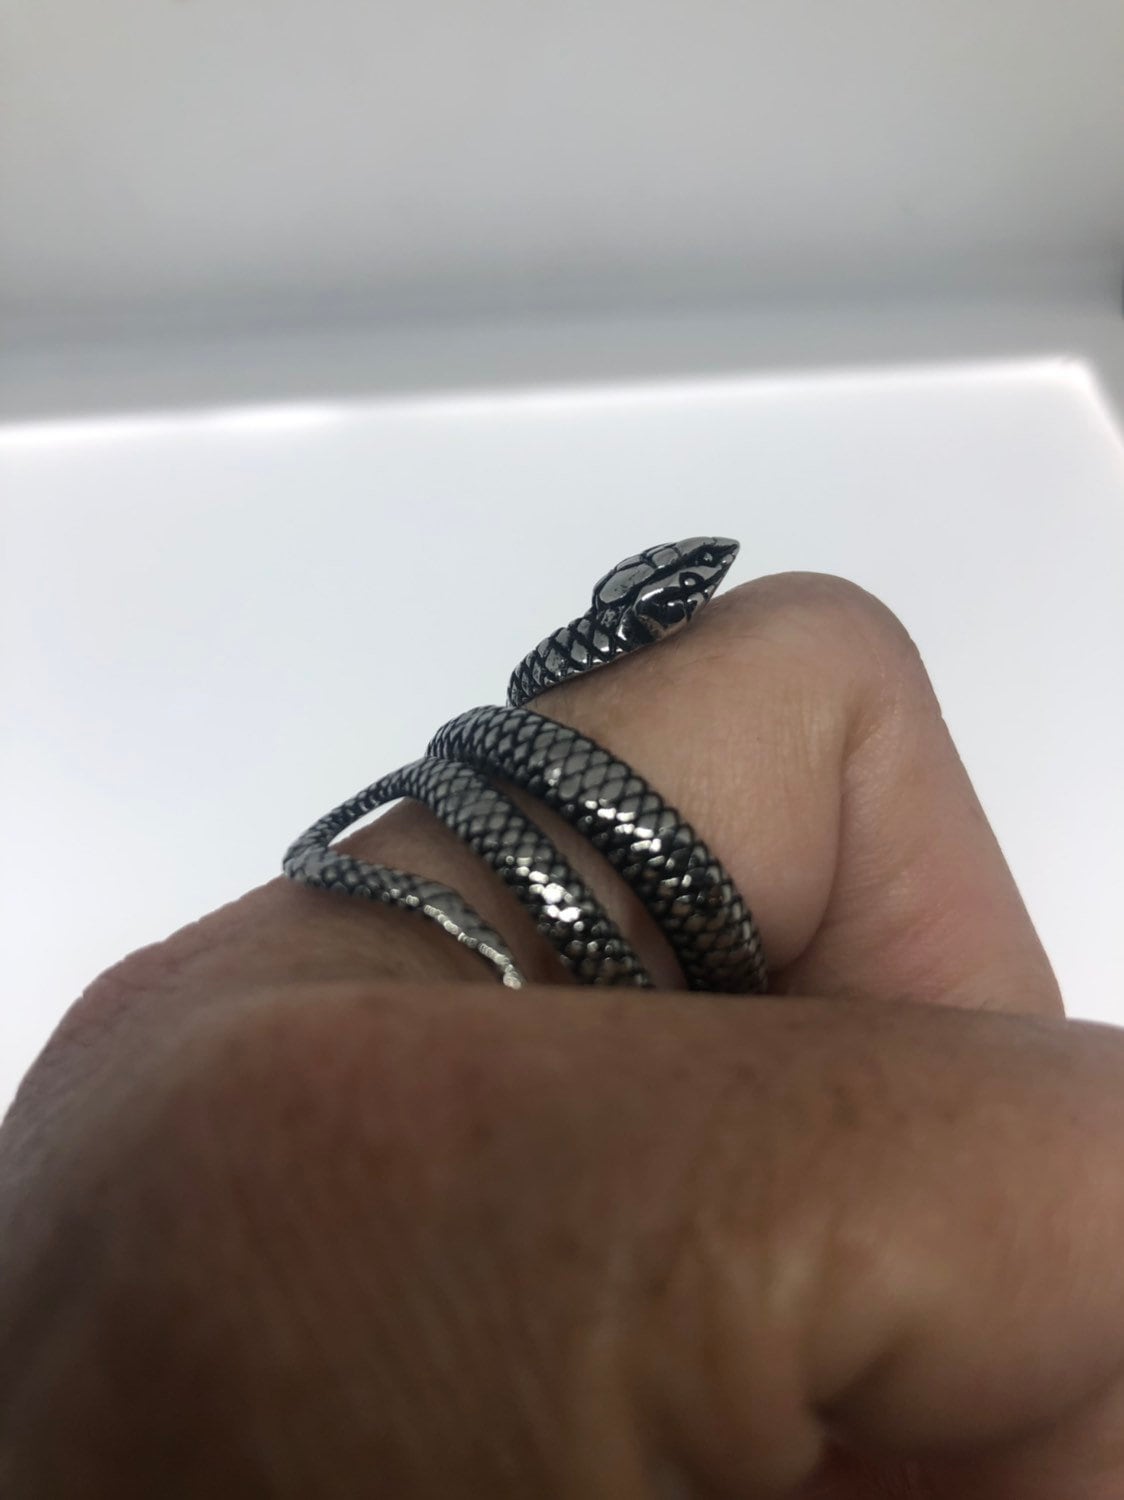 Vintage Gothic Stainless Steel Snake Serpant Mens Ring